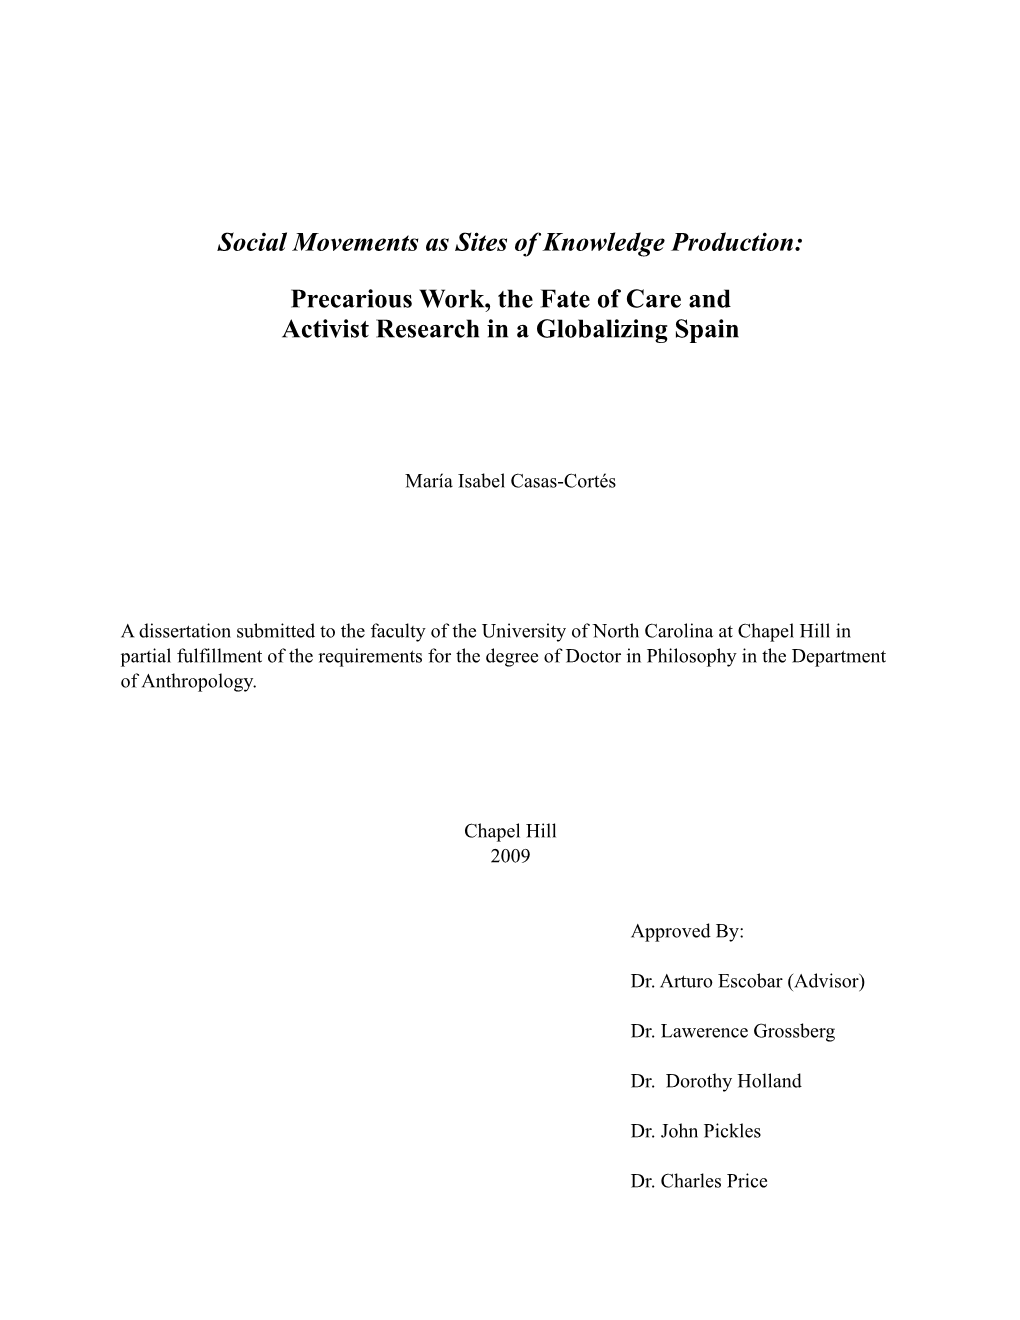 Social Movements As Sites of Knowledge Production